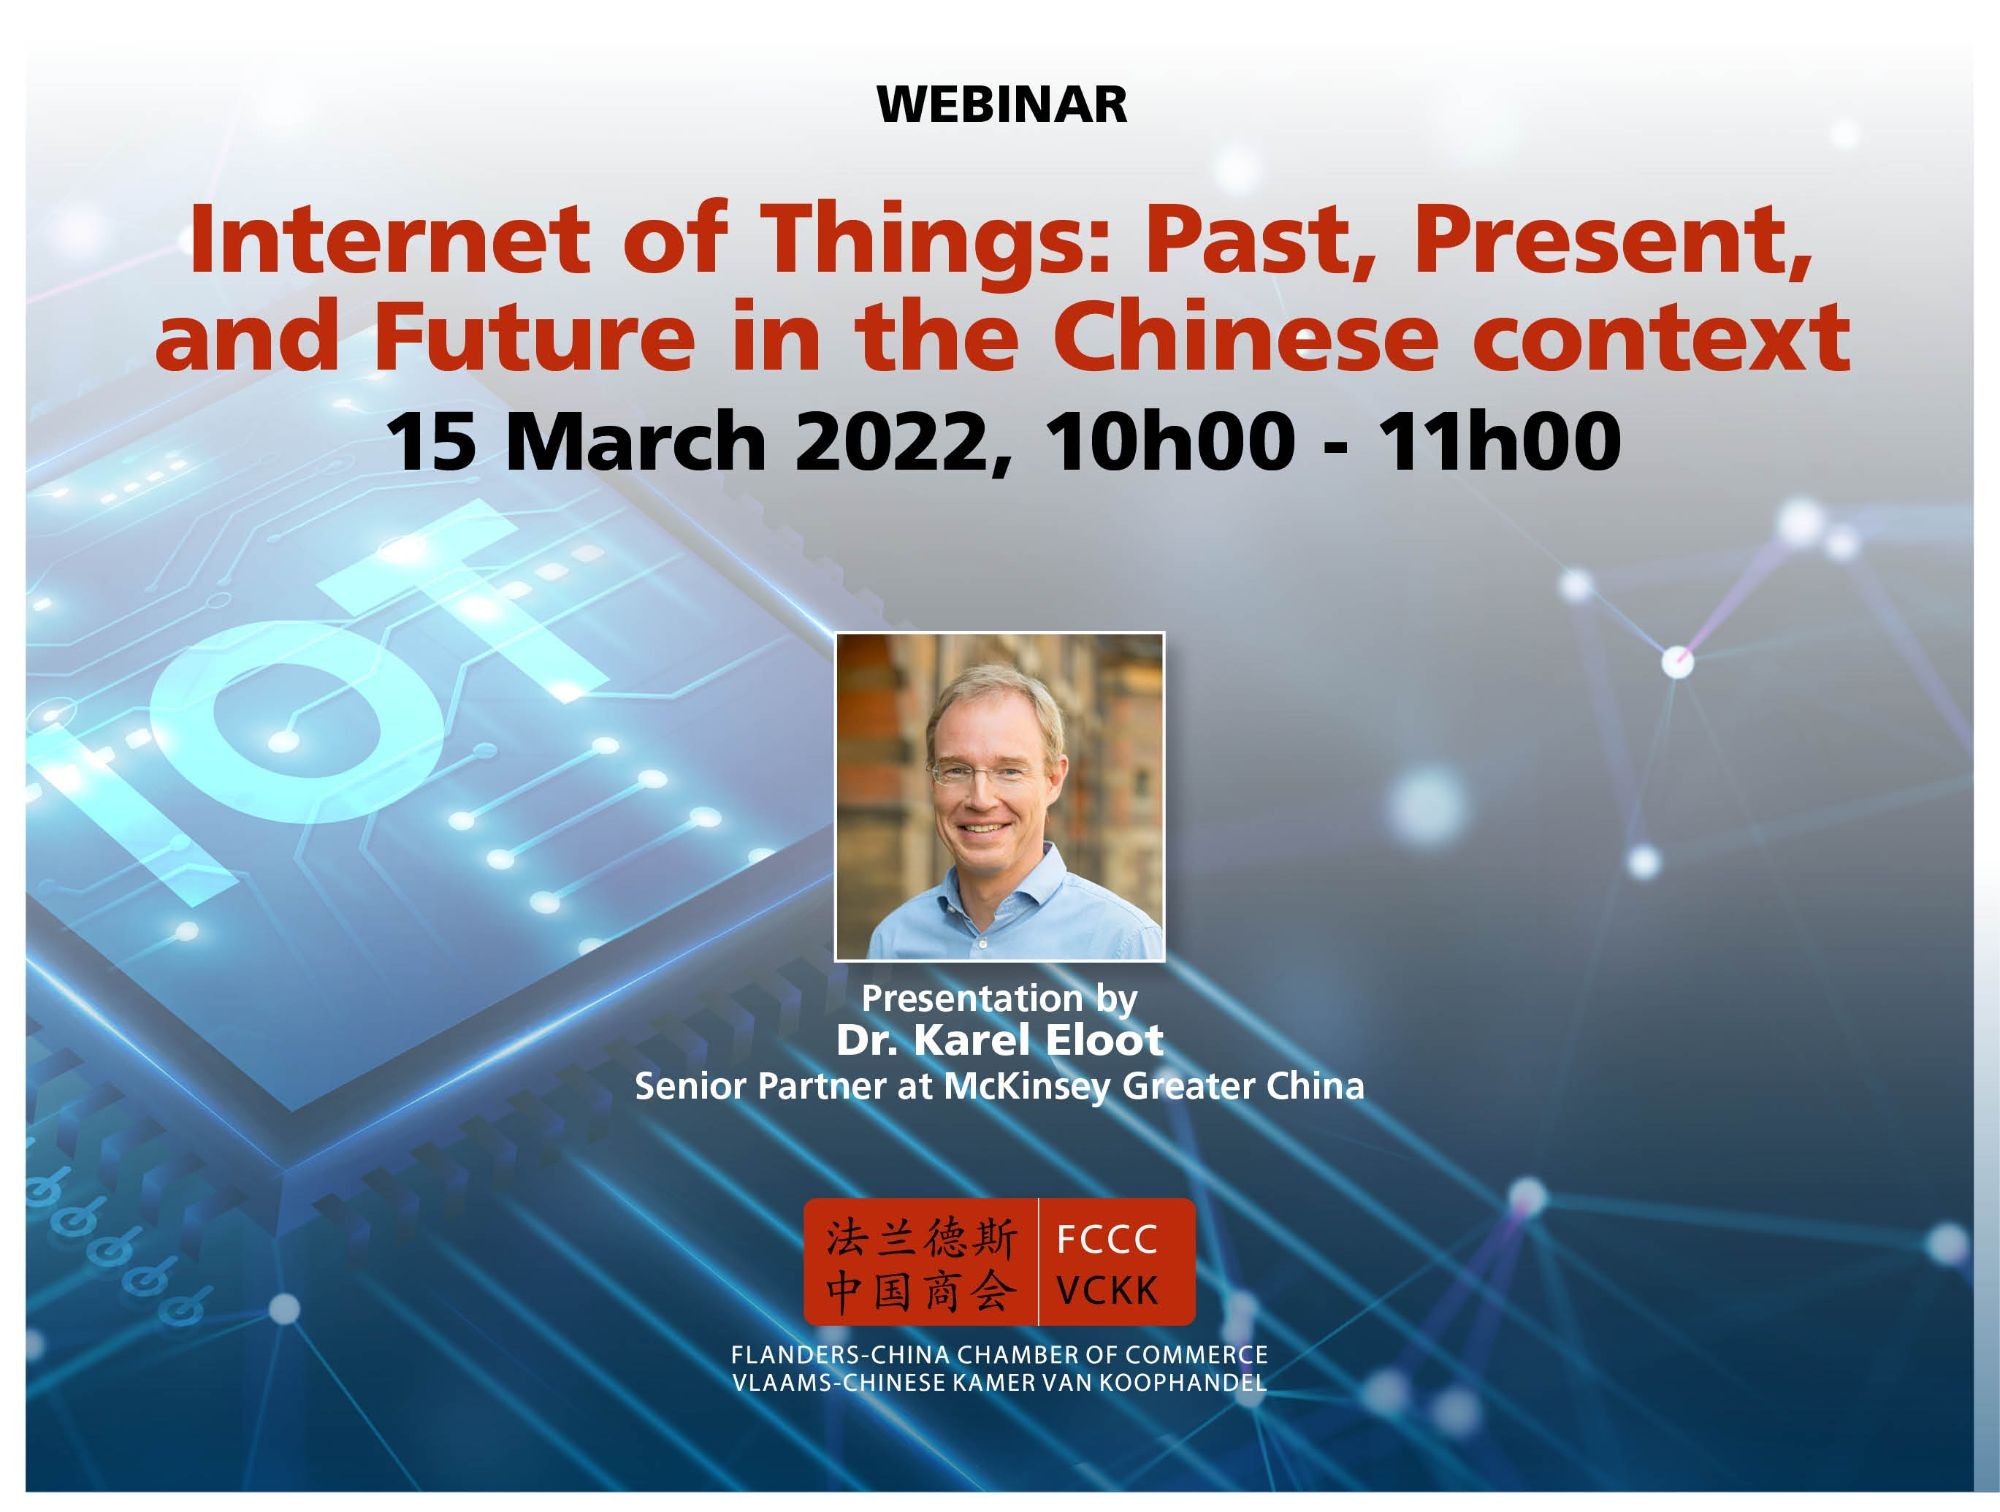 Webinar: Internet of Things: Past, Present, and Future in the Chinese context